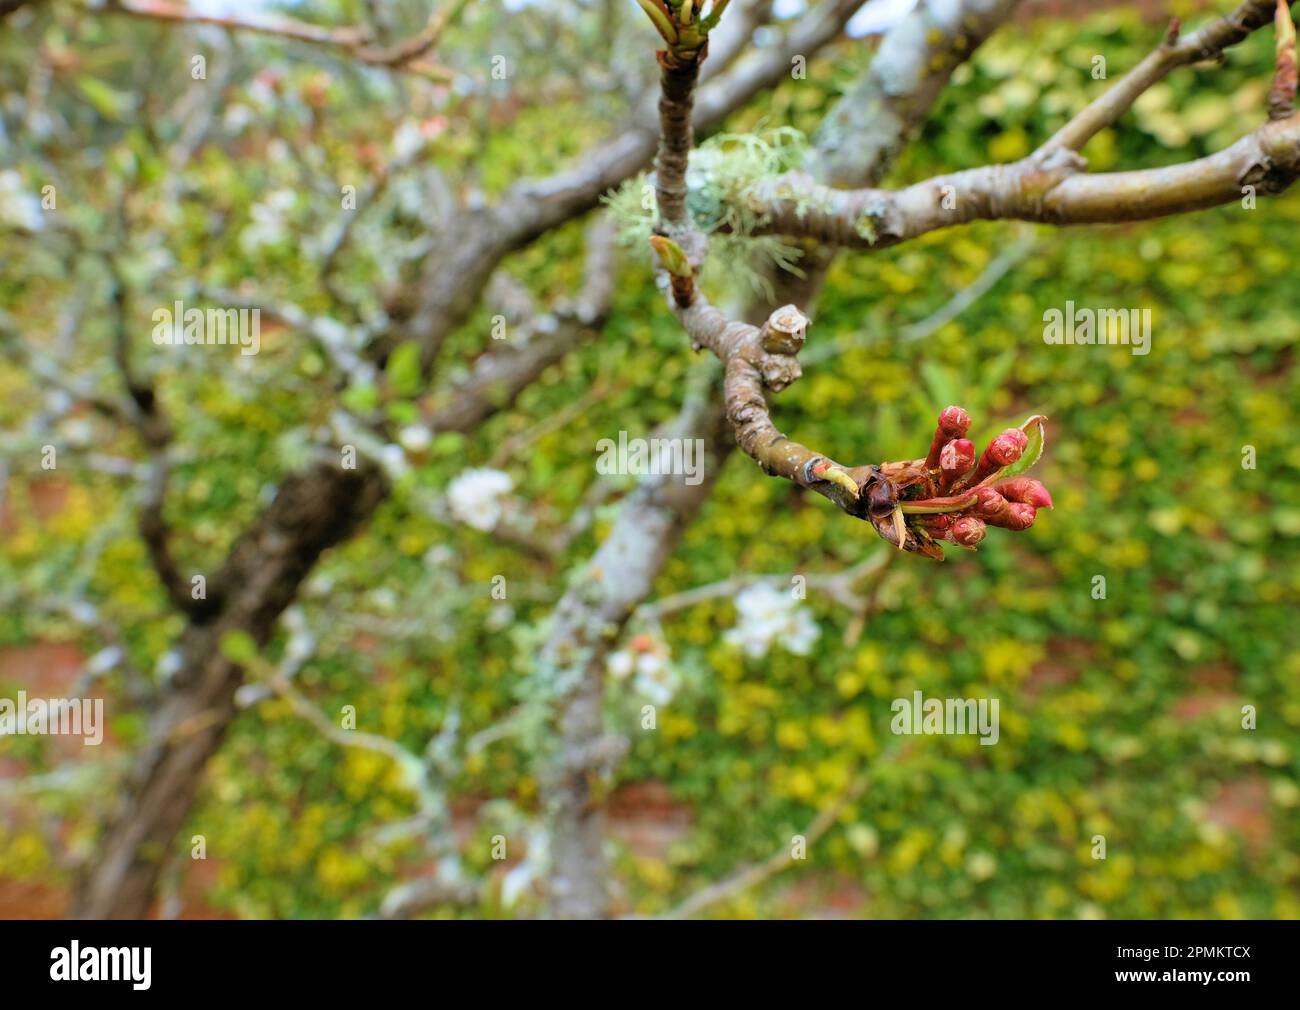 Spring time flower buds waiting to bloom on a Seckel variety pear tree, part of the Pyrus communis pear family. Stock Photo